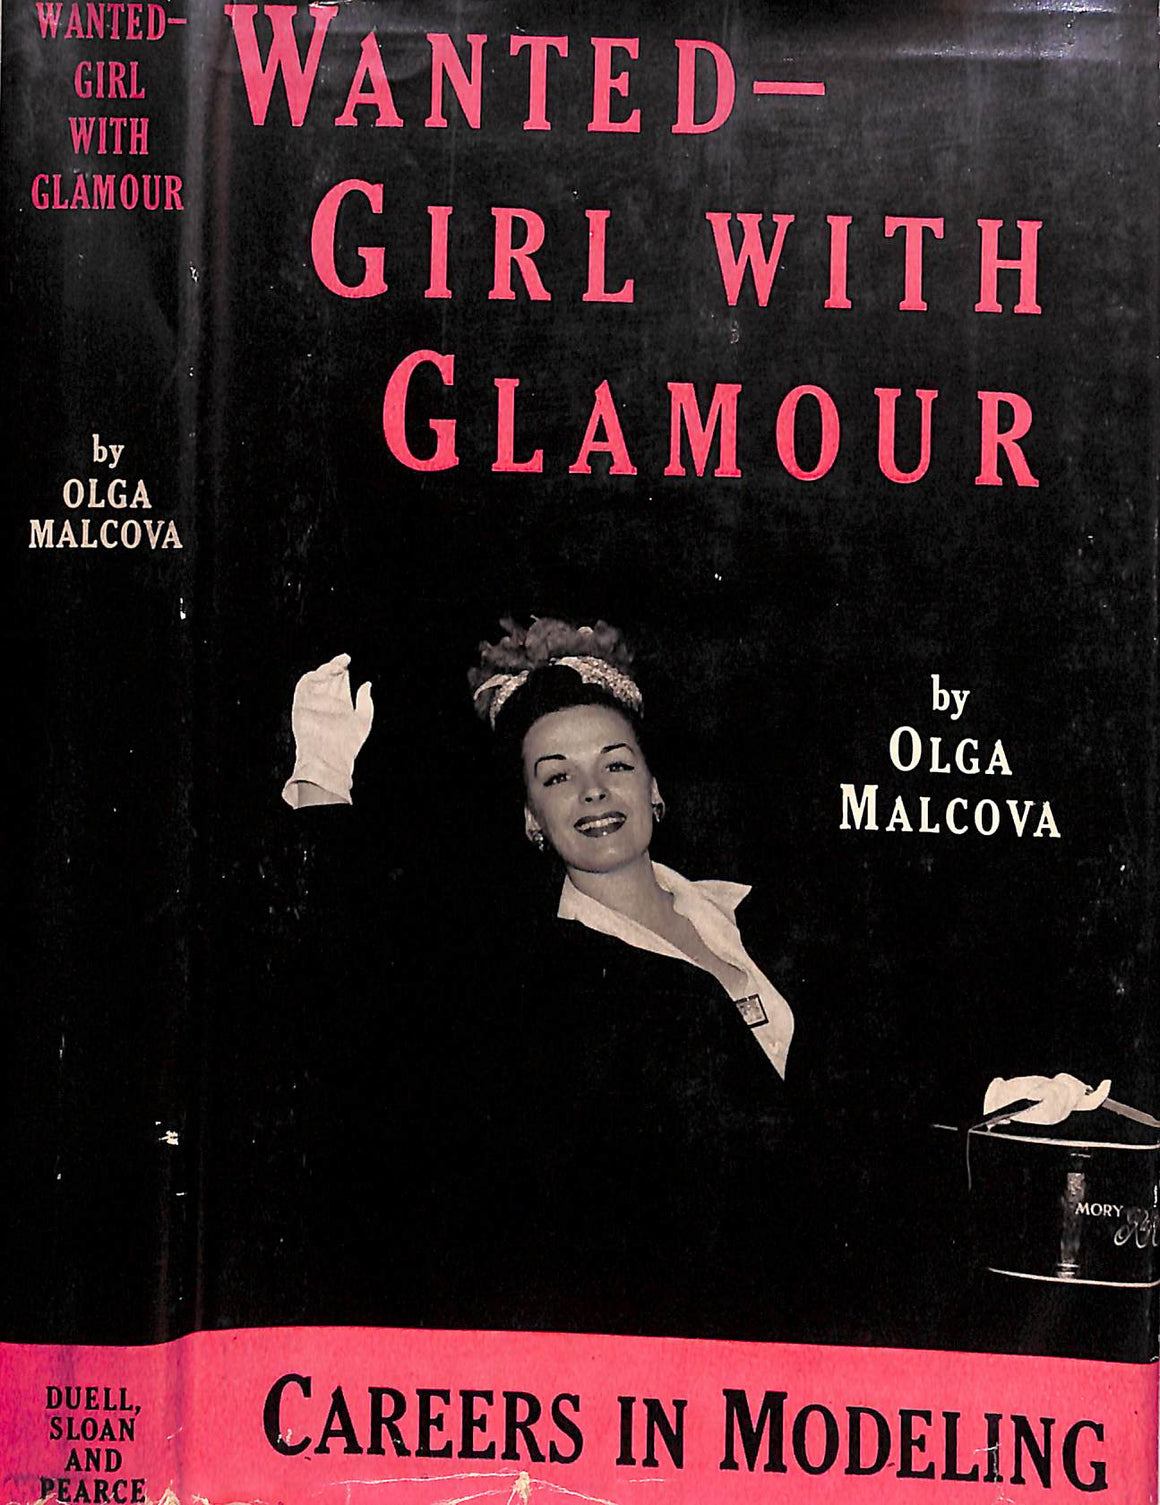 "Wanted: Girl With Glamour: Careers In Modeling" 1941 MALCOVA, Olga